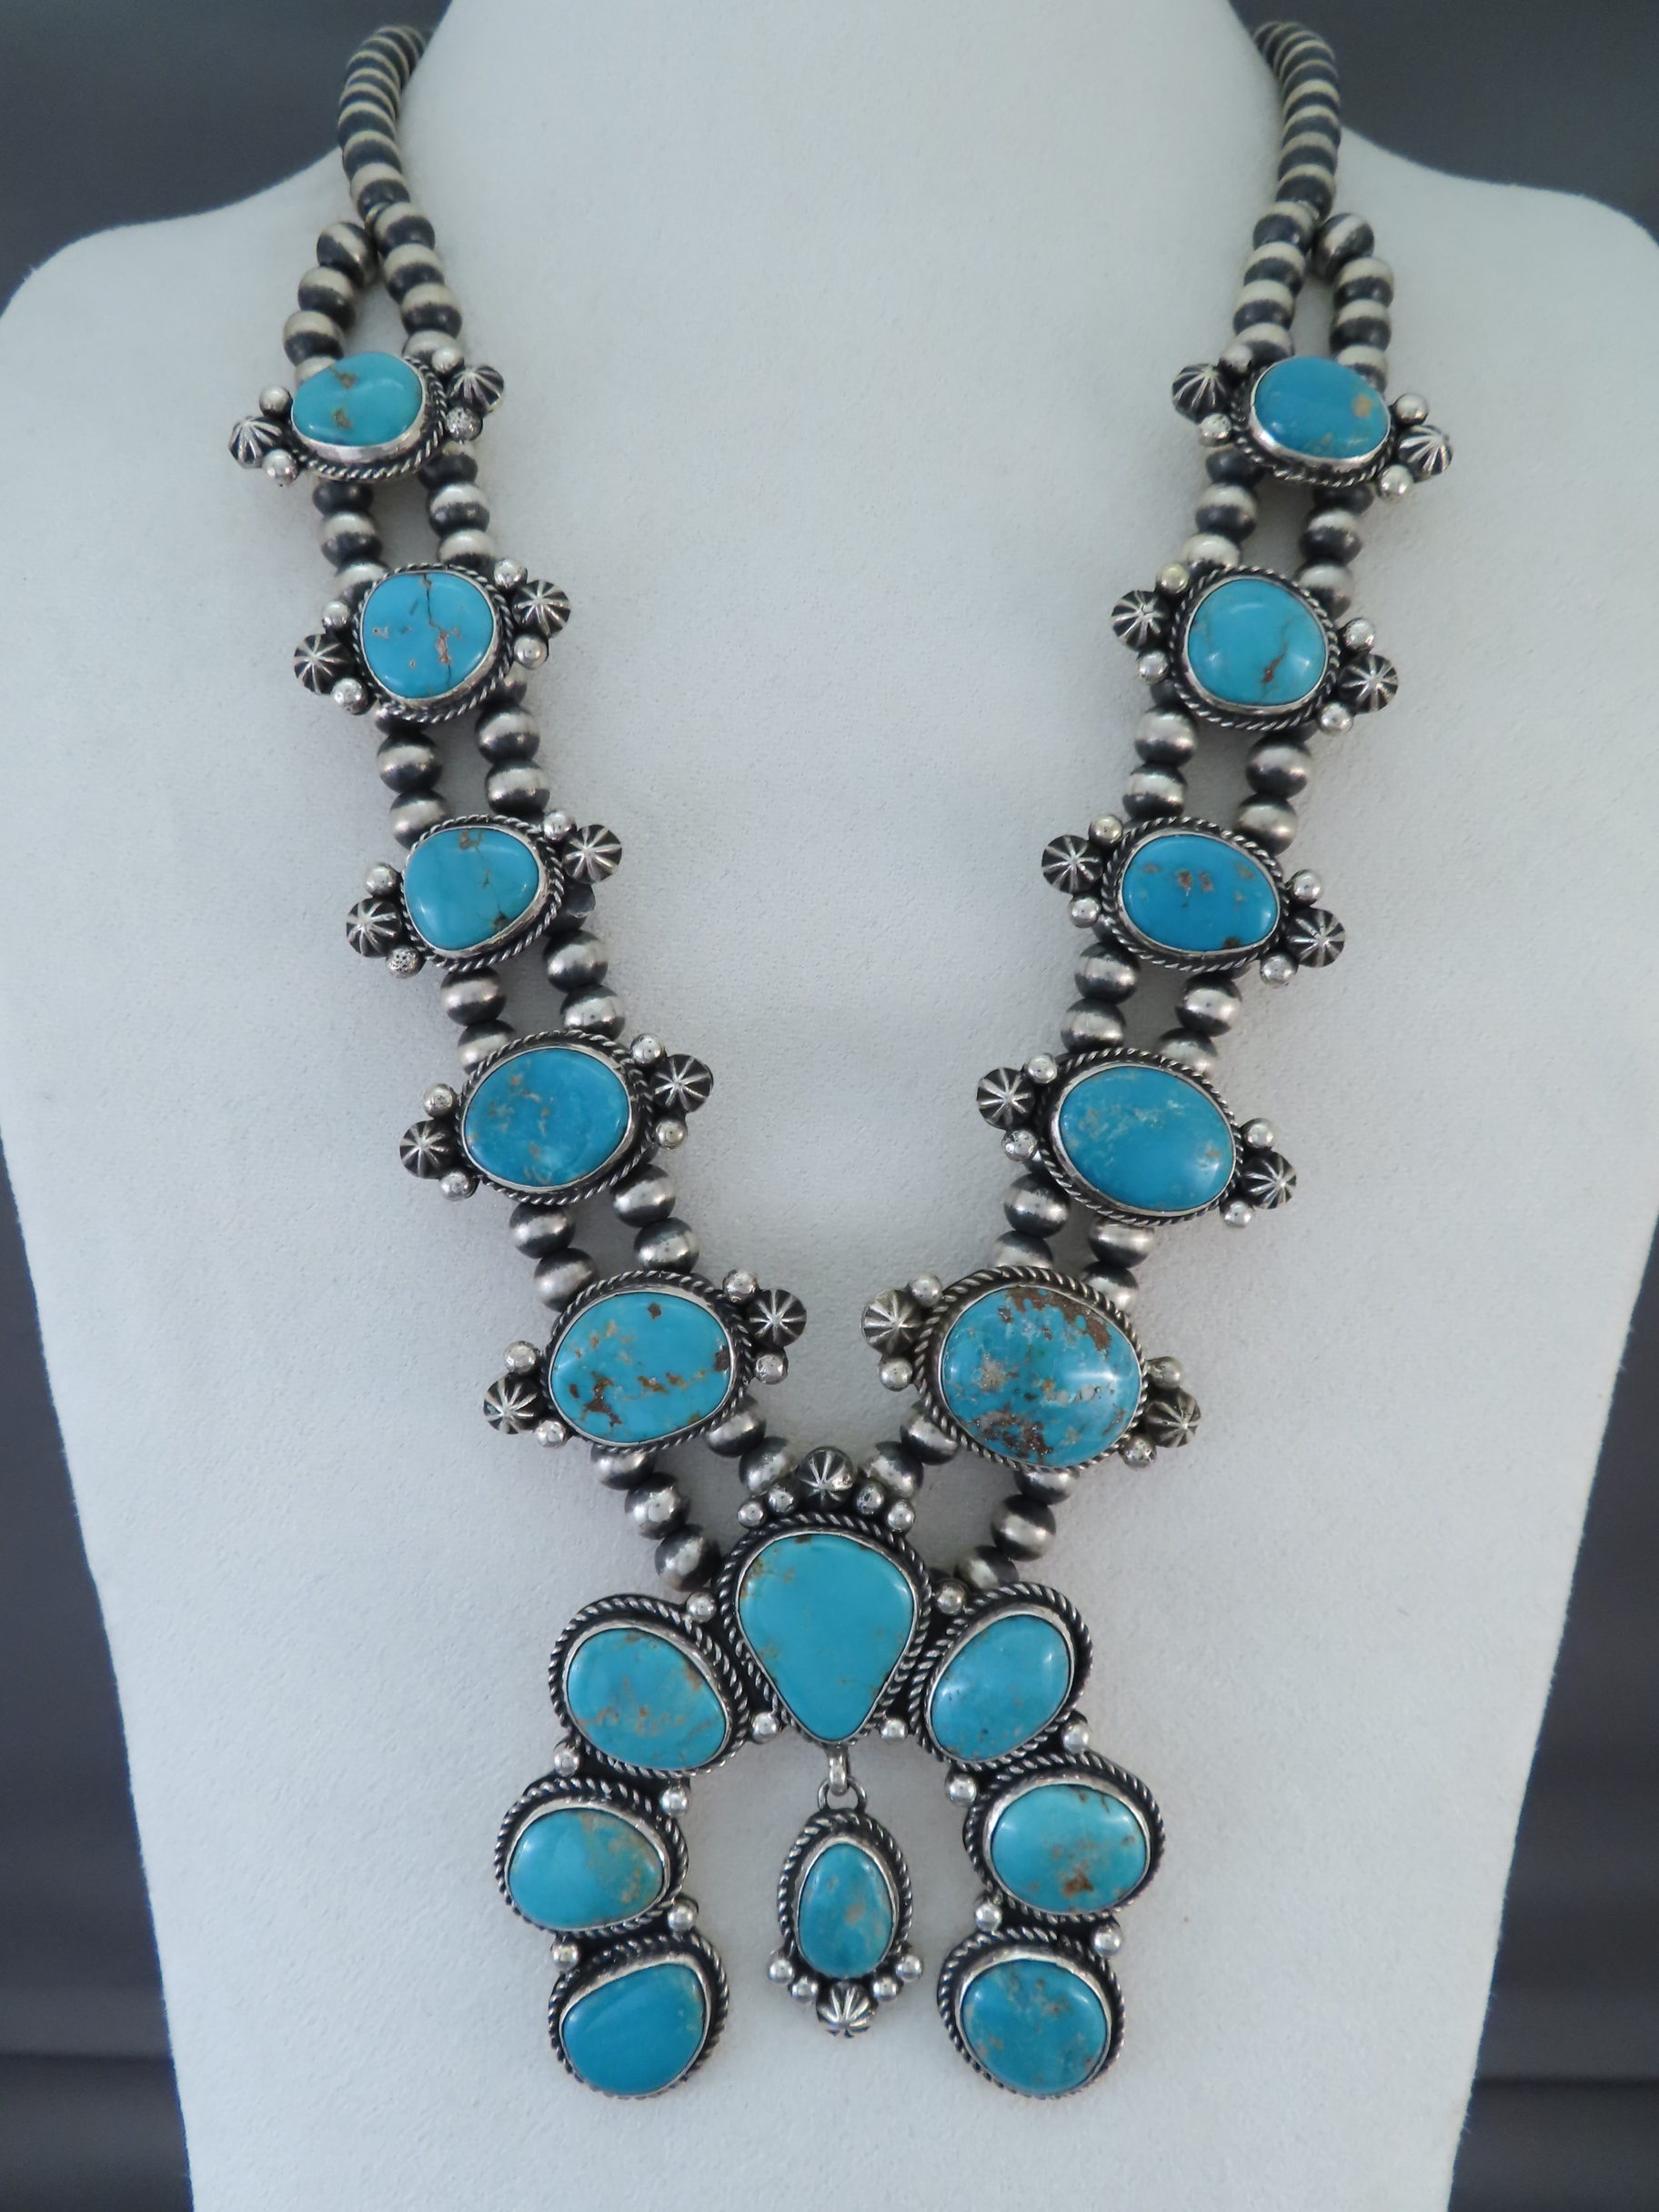 Fox Turquoise Squash Blossom Necklace & Earring Set by Native American Navajo Indian Jewelry Artist, Linda Yazzie $2,950- FOR SALE